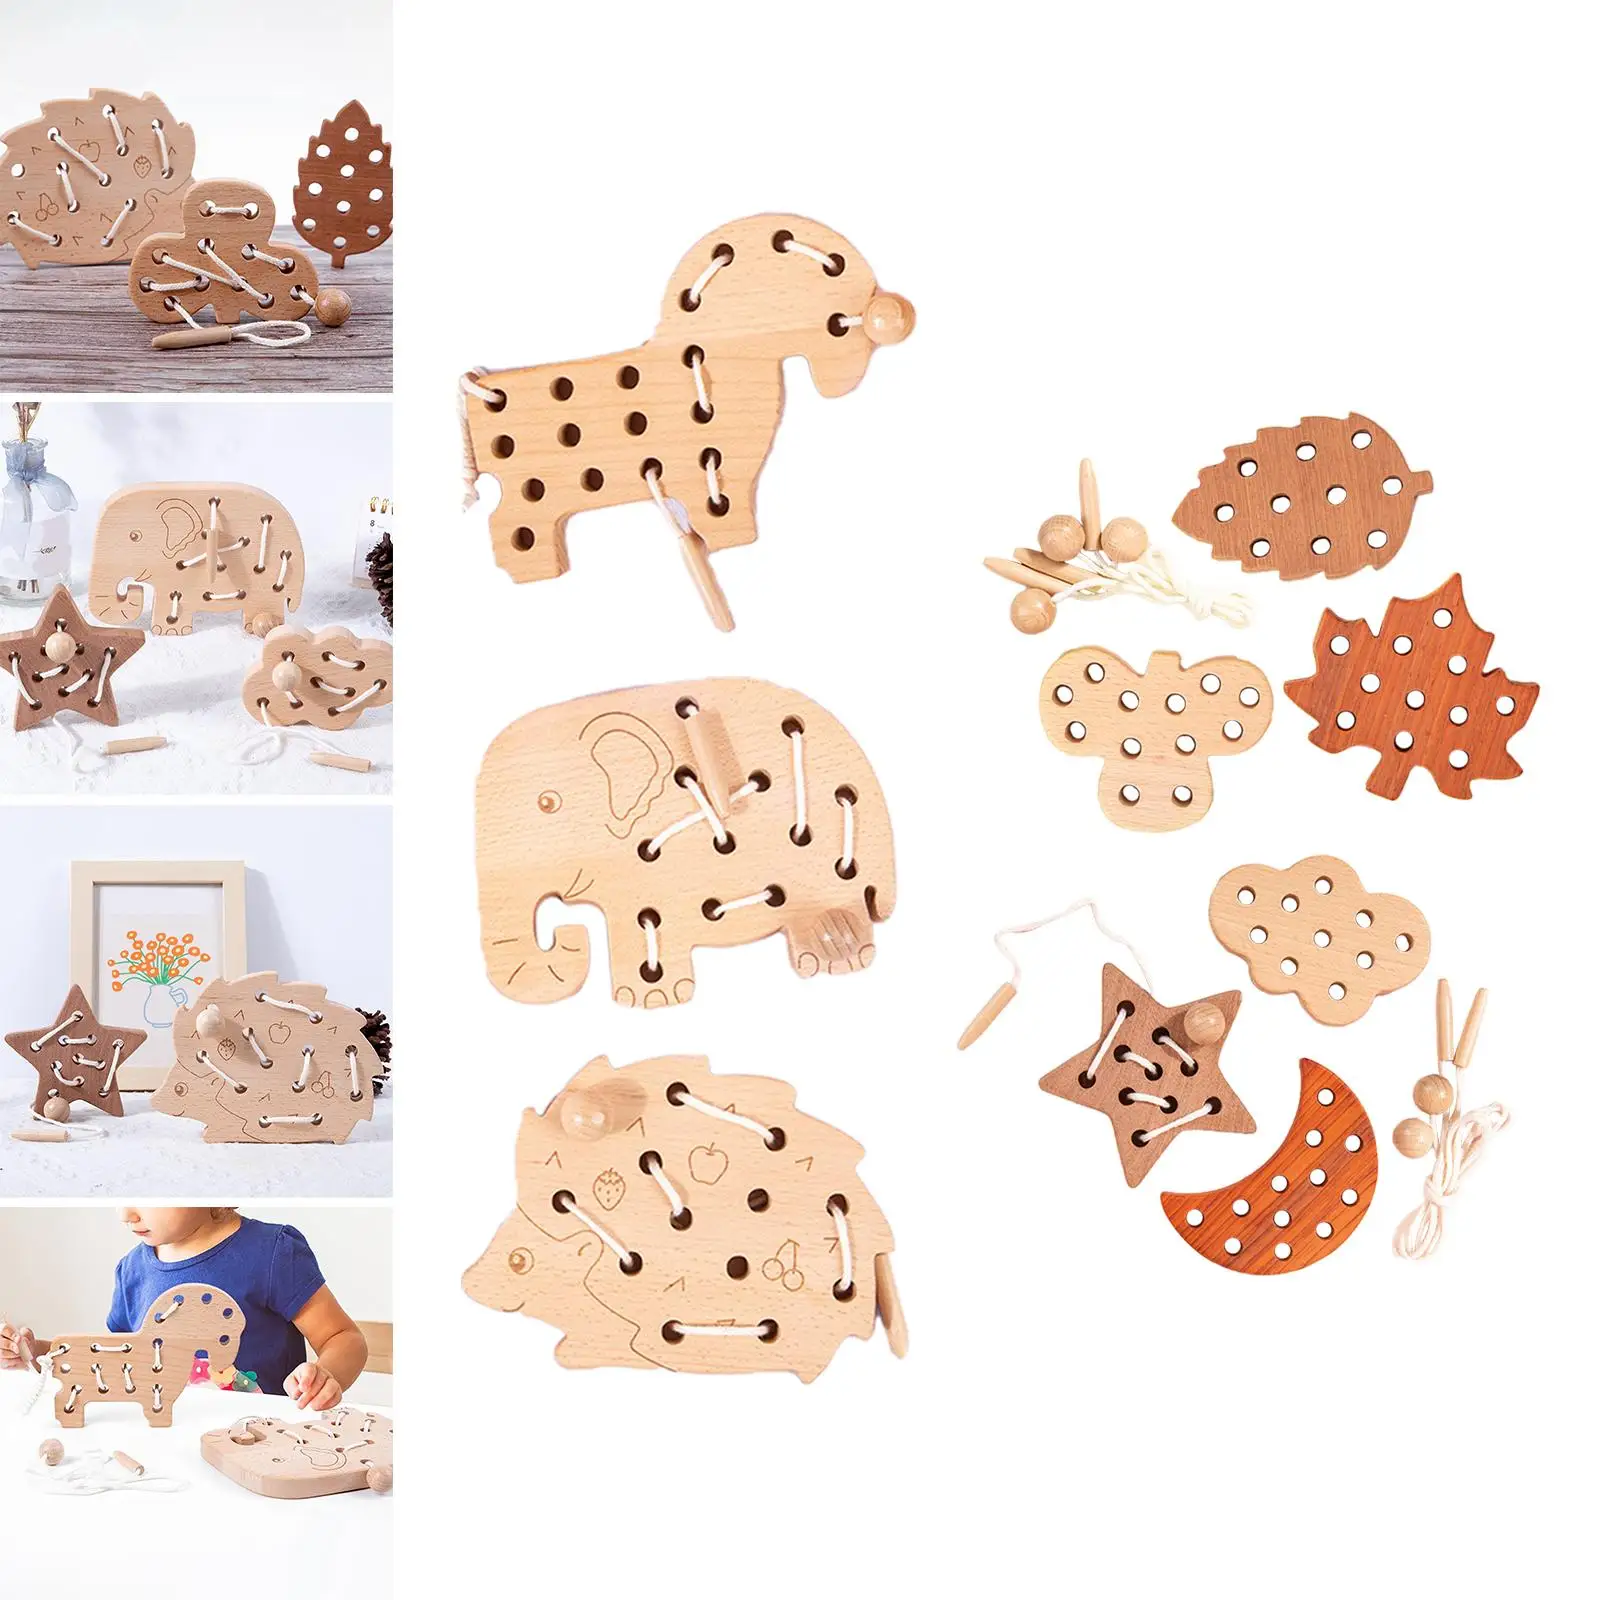 3x Wood Lace Block Puzzle Teaching Aids Educational Wooden Lacing Threading for Kids Car Boys Birthday Gift